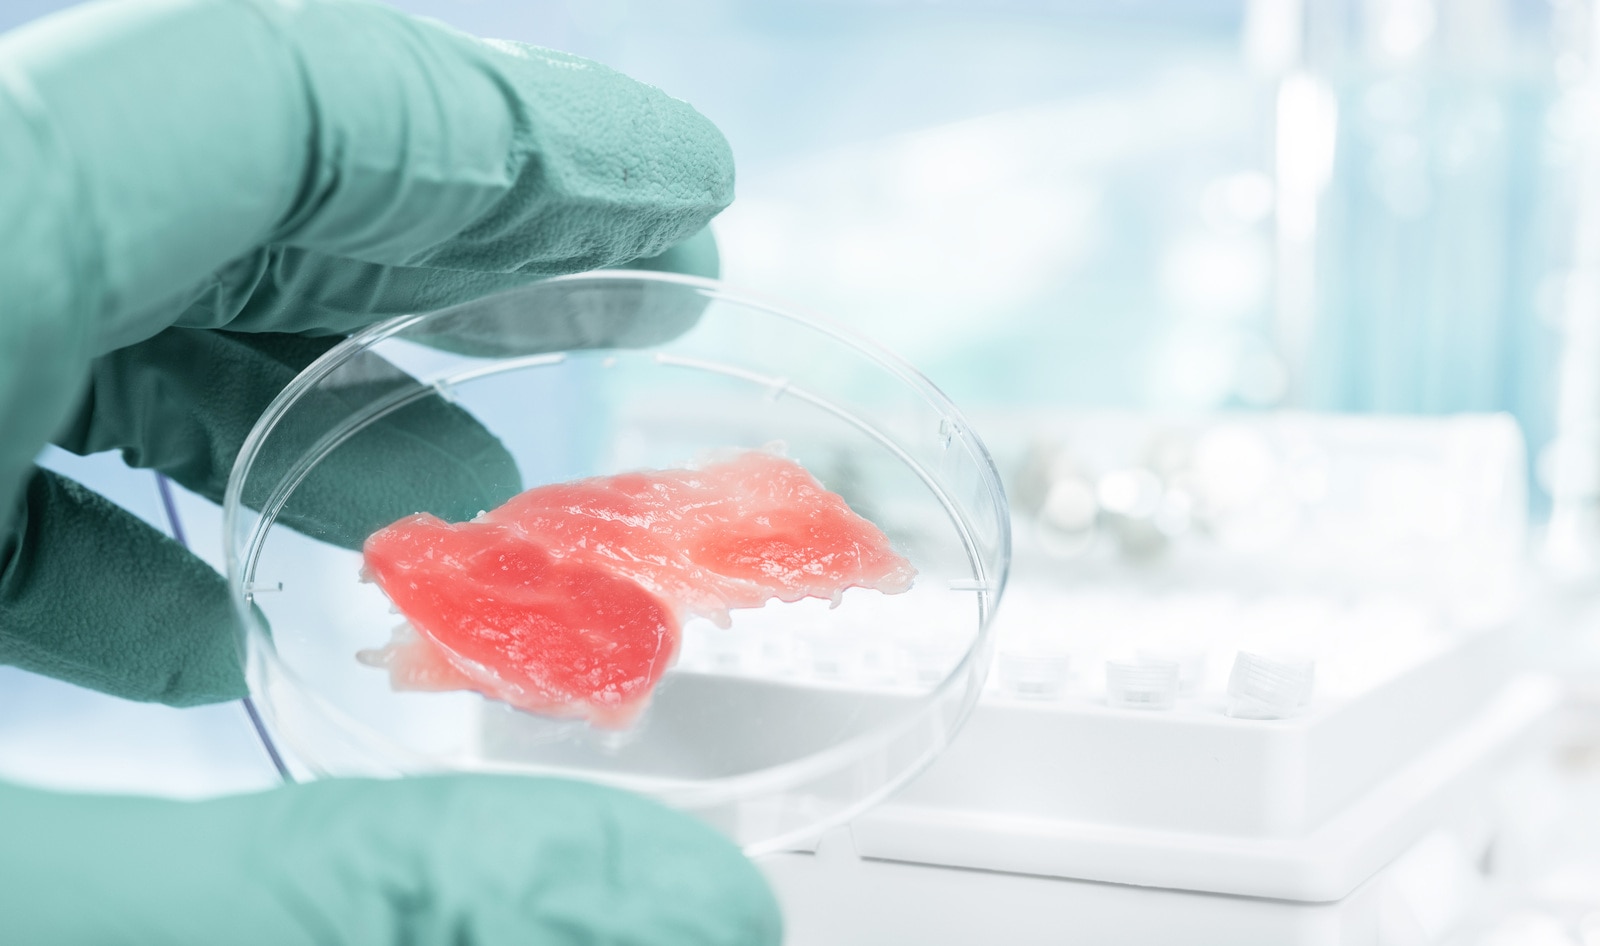 US Government Grants $3.5 Million to California University to Research Lab-Grown Meat